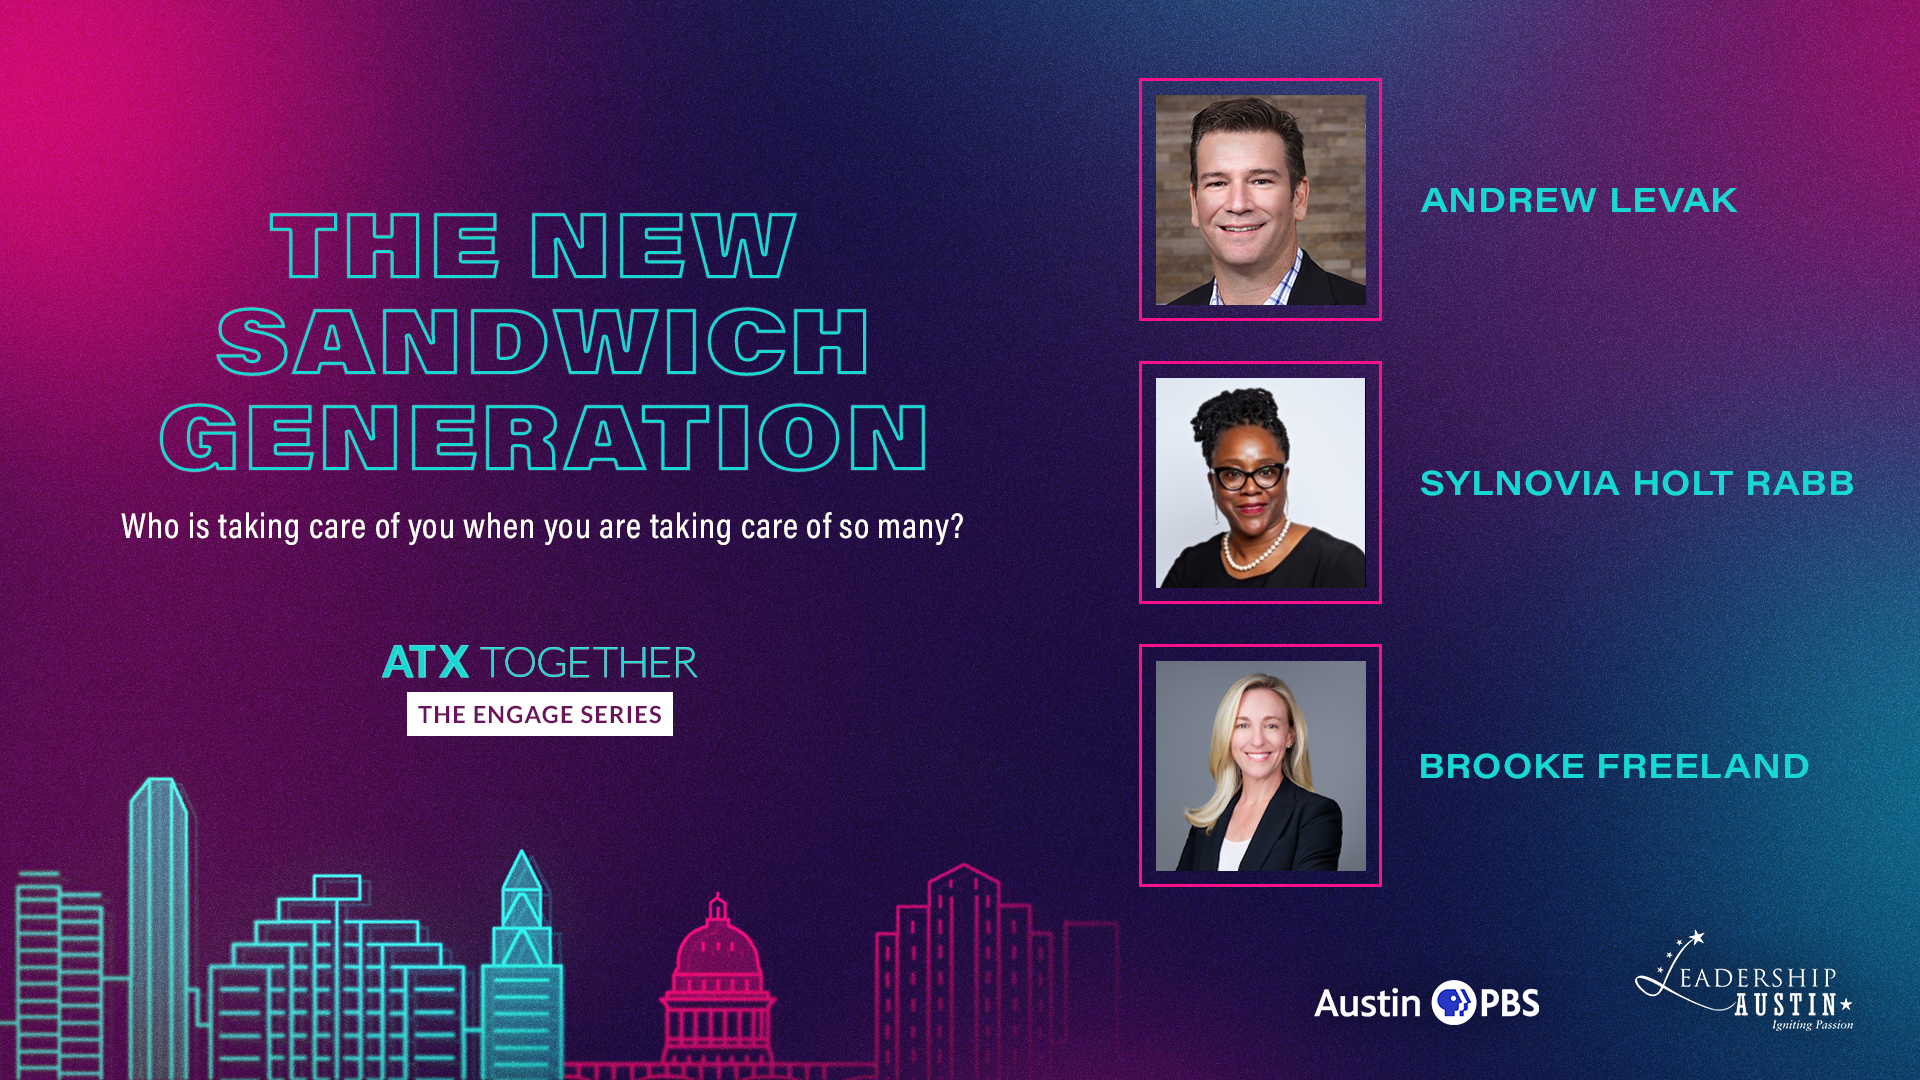 ATX Together: The Engage Series: The New Sandwich Generation. Who is taking care of you when you are taking care of so many? With Andrew Levak, Sylvonia Holt Rabb, and Brooke Freeland. 